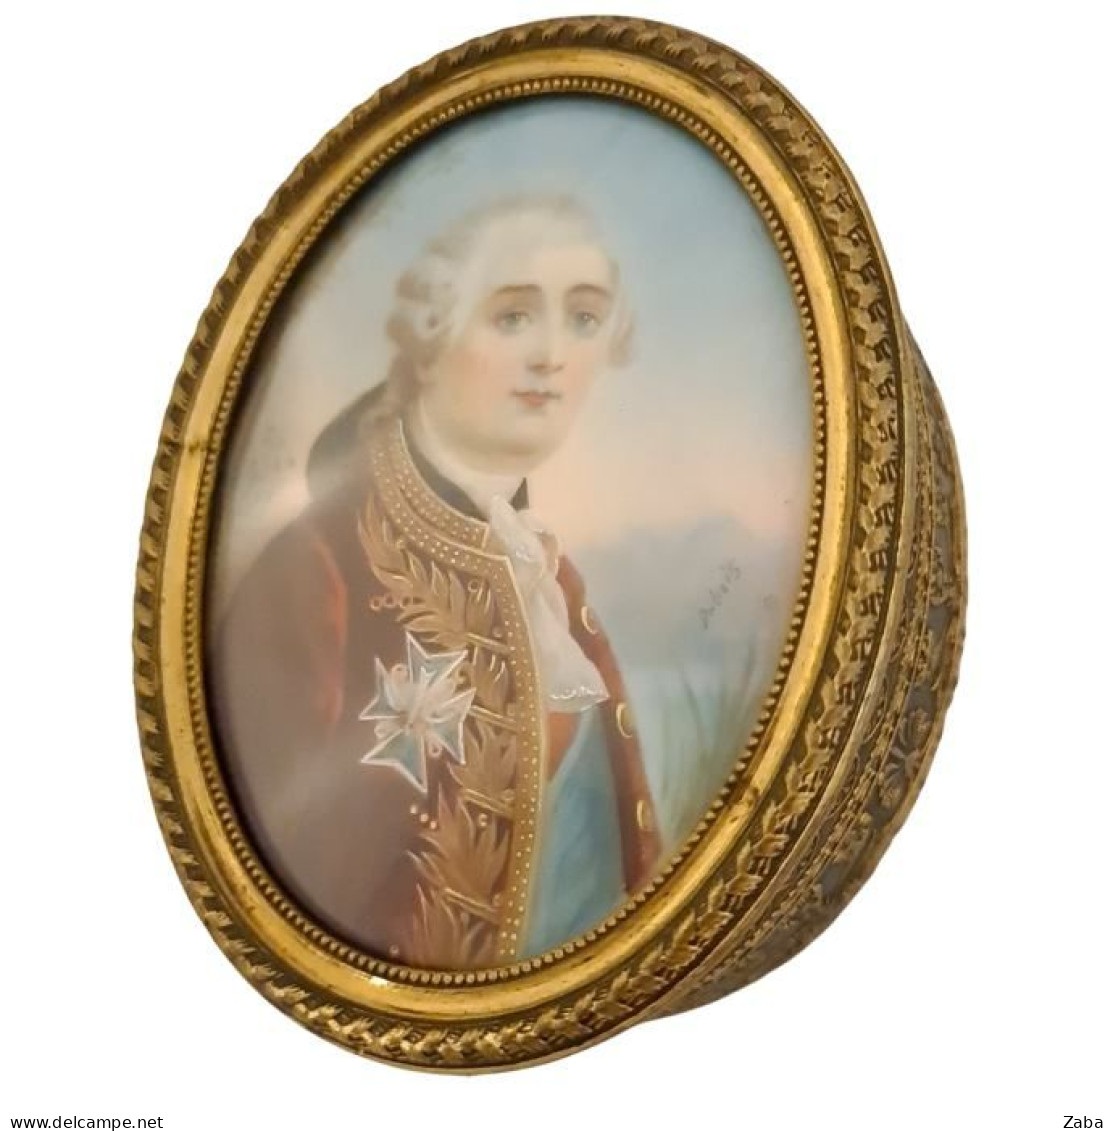 French King LOUIS XVI Yewelry Box, Signed & Painted by FREDERIC DUBOIS.